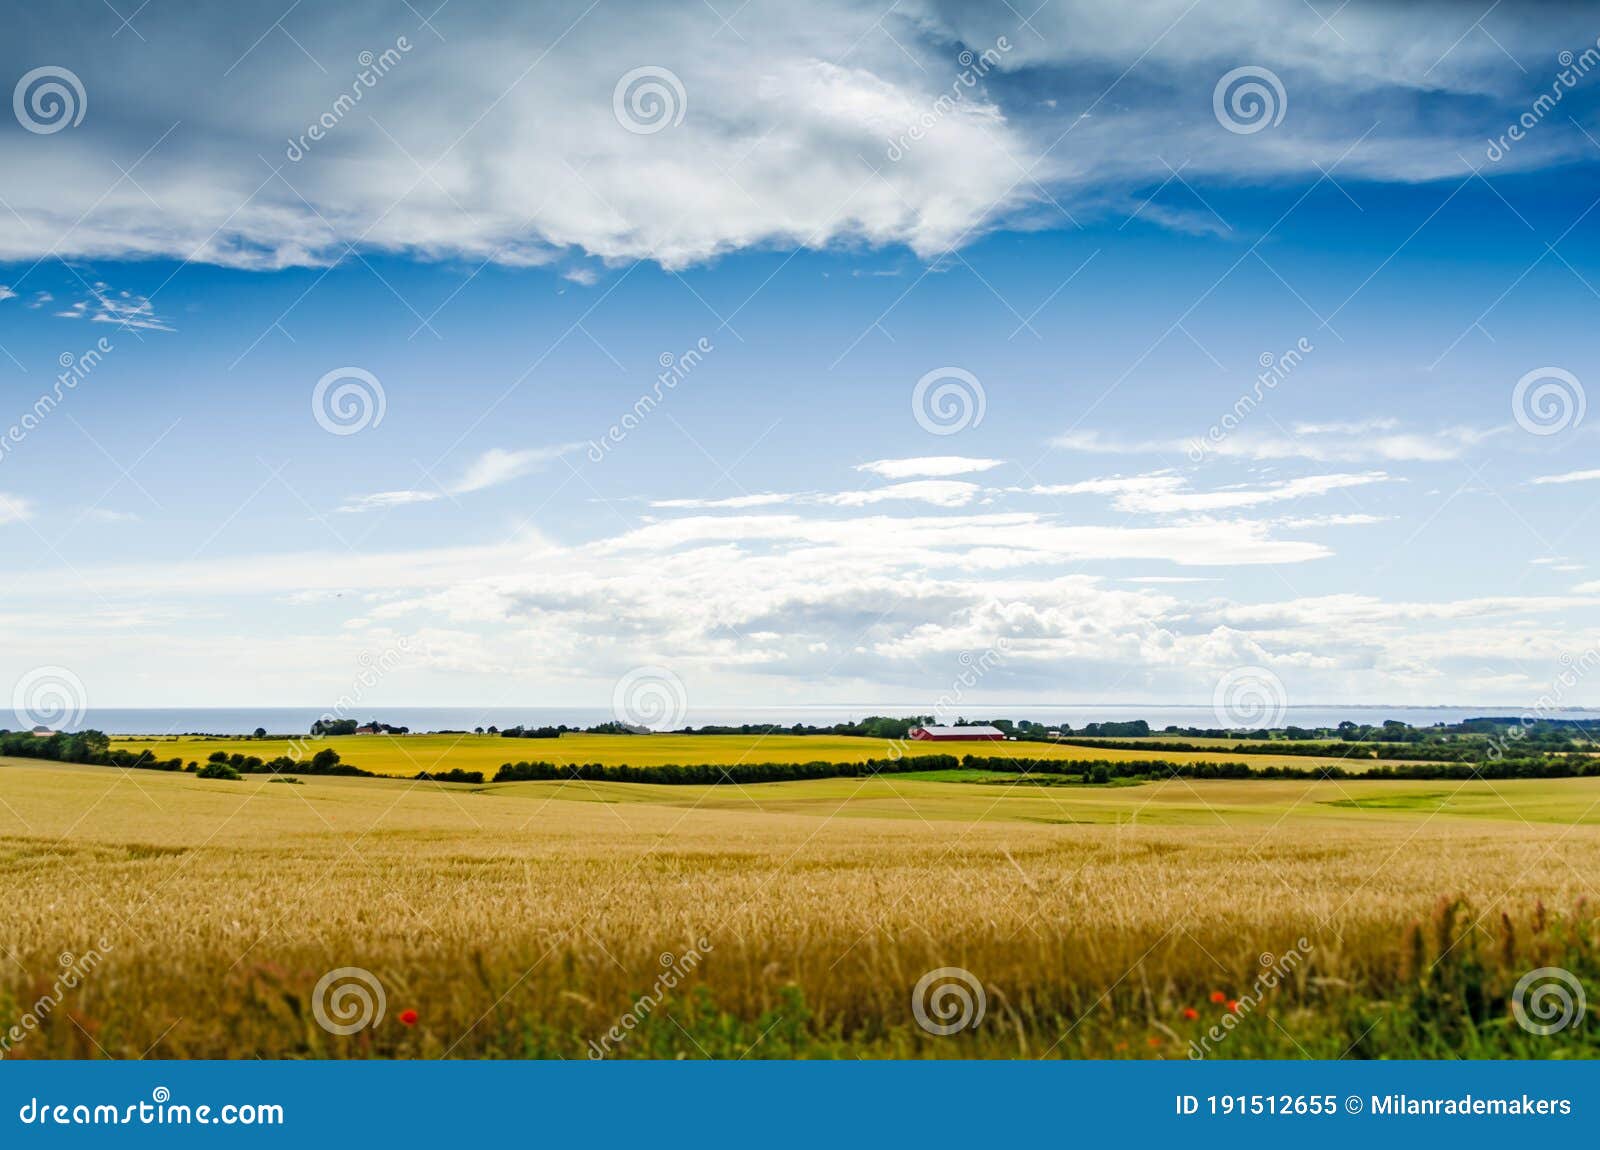 sang lidenskabelig kjole Danish Landscape with Farm Fields and the Sea in the Background during  Summer Denmark Stock Image - Image of national, park: 191512655